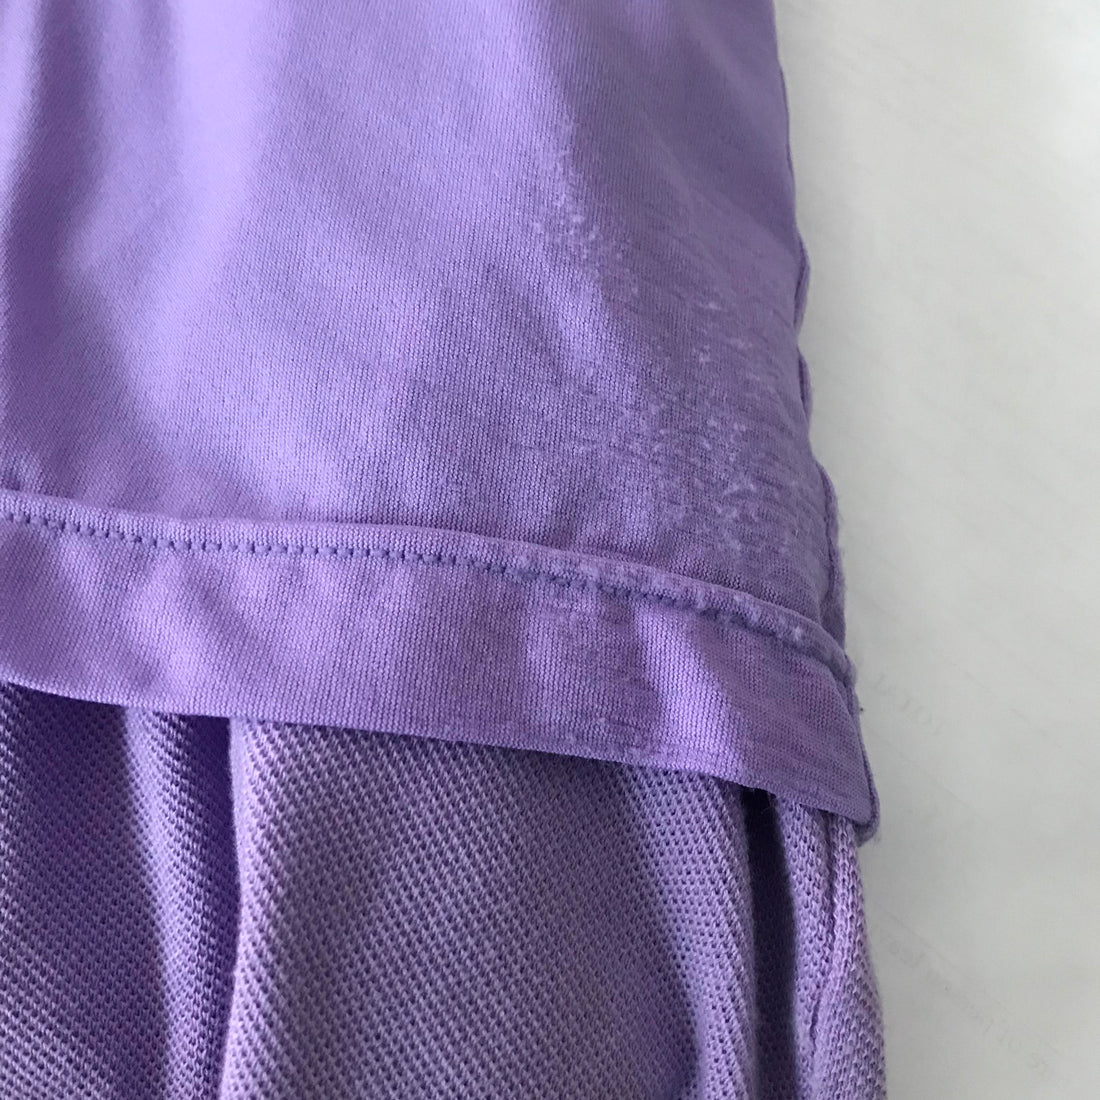 Comme des Garcons Fall 2007 Lilac Purple Layered Polo Shirt